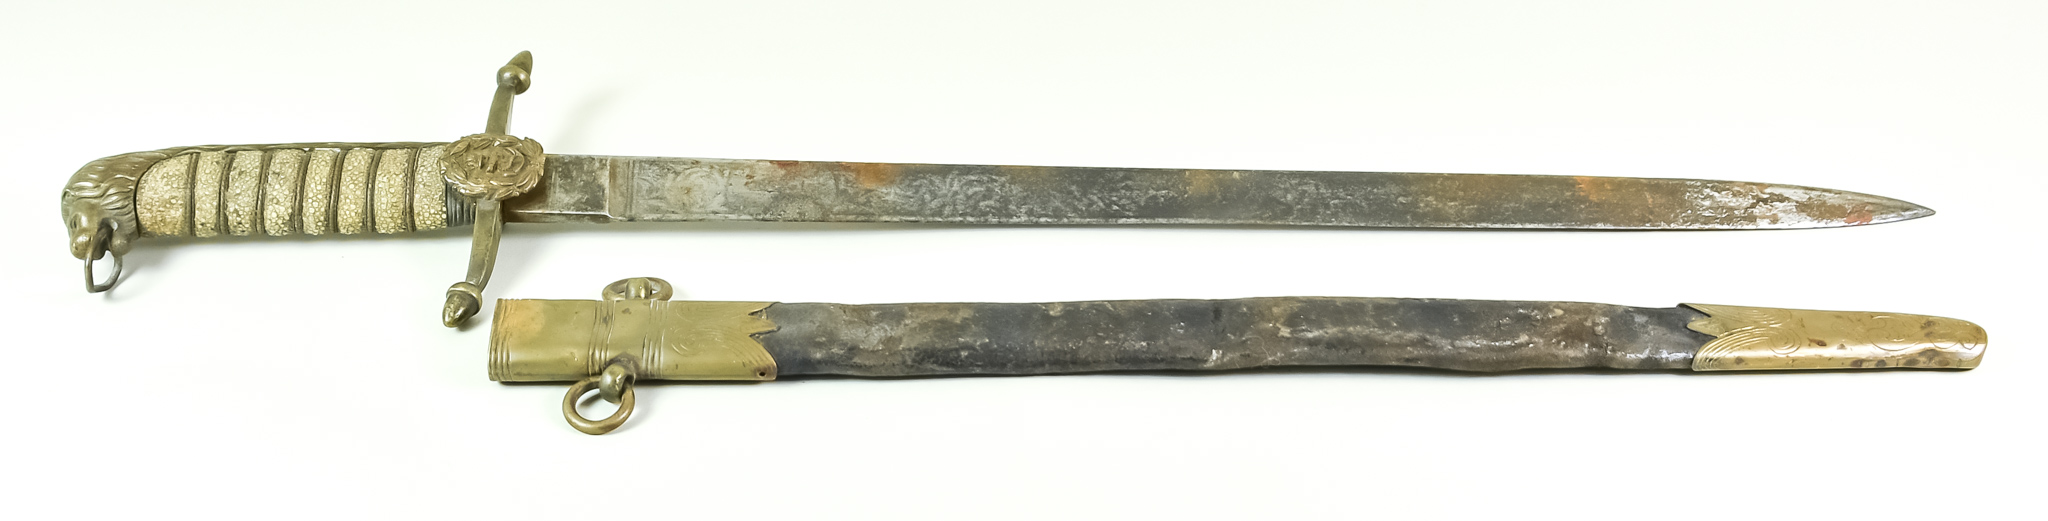 A 19th Century British Naval Dirk, 17.5ins blade, brass cross guard with anchor emblem, ray skin